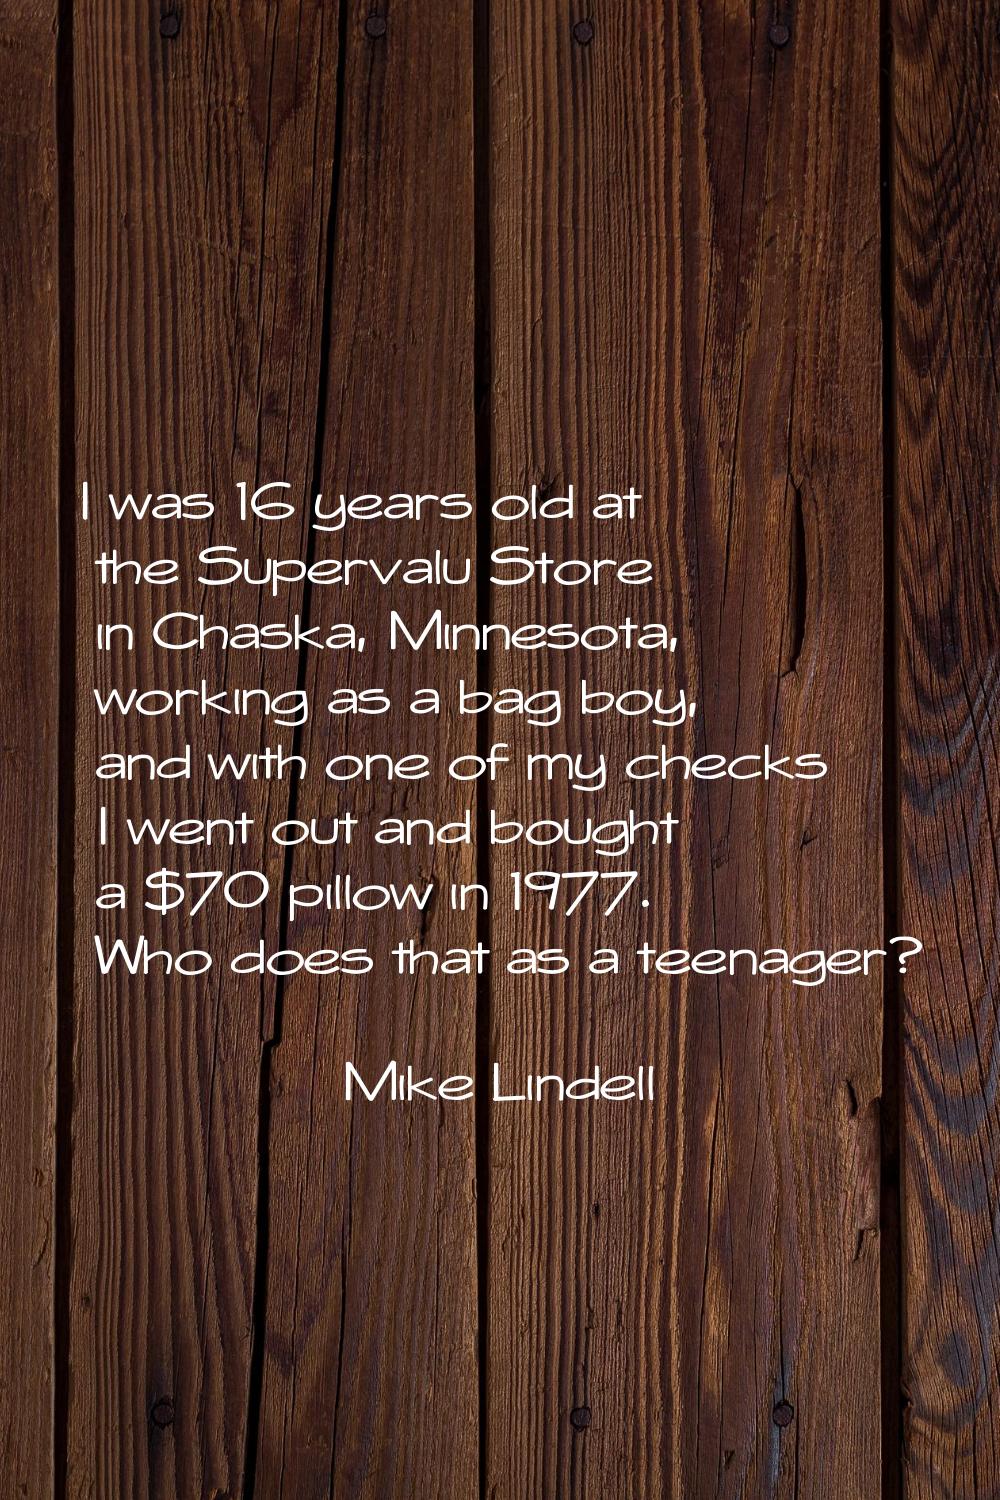 I was 16 years old at the Supervalu Store in Chaska, Minnesota, working as a bag boy, and with one 